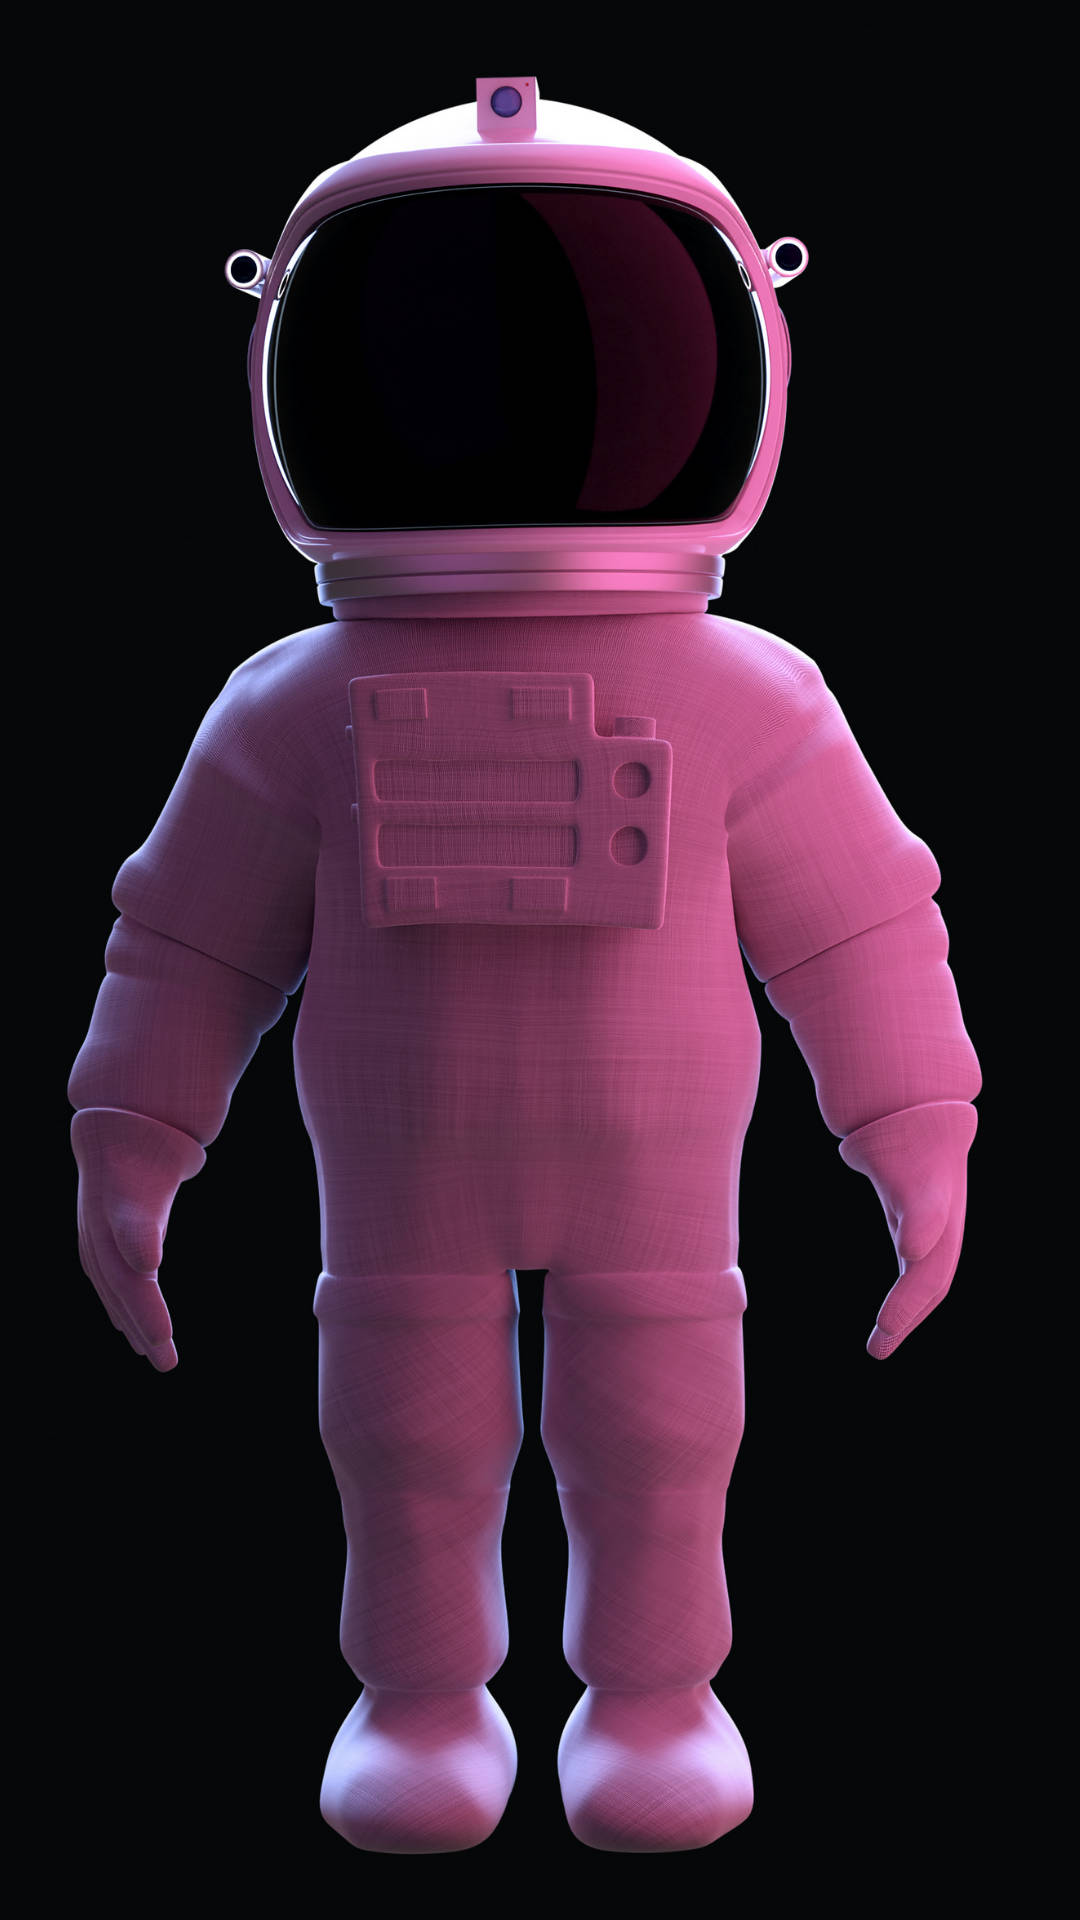 1080X1920 Astronaut Wallpaper and Background